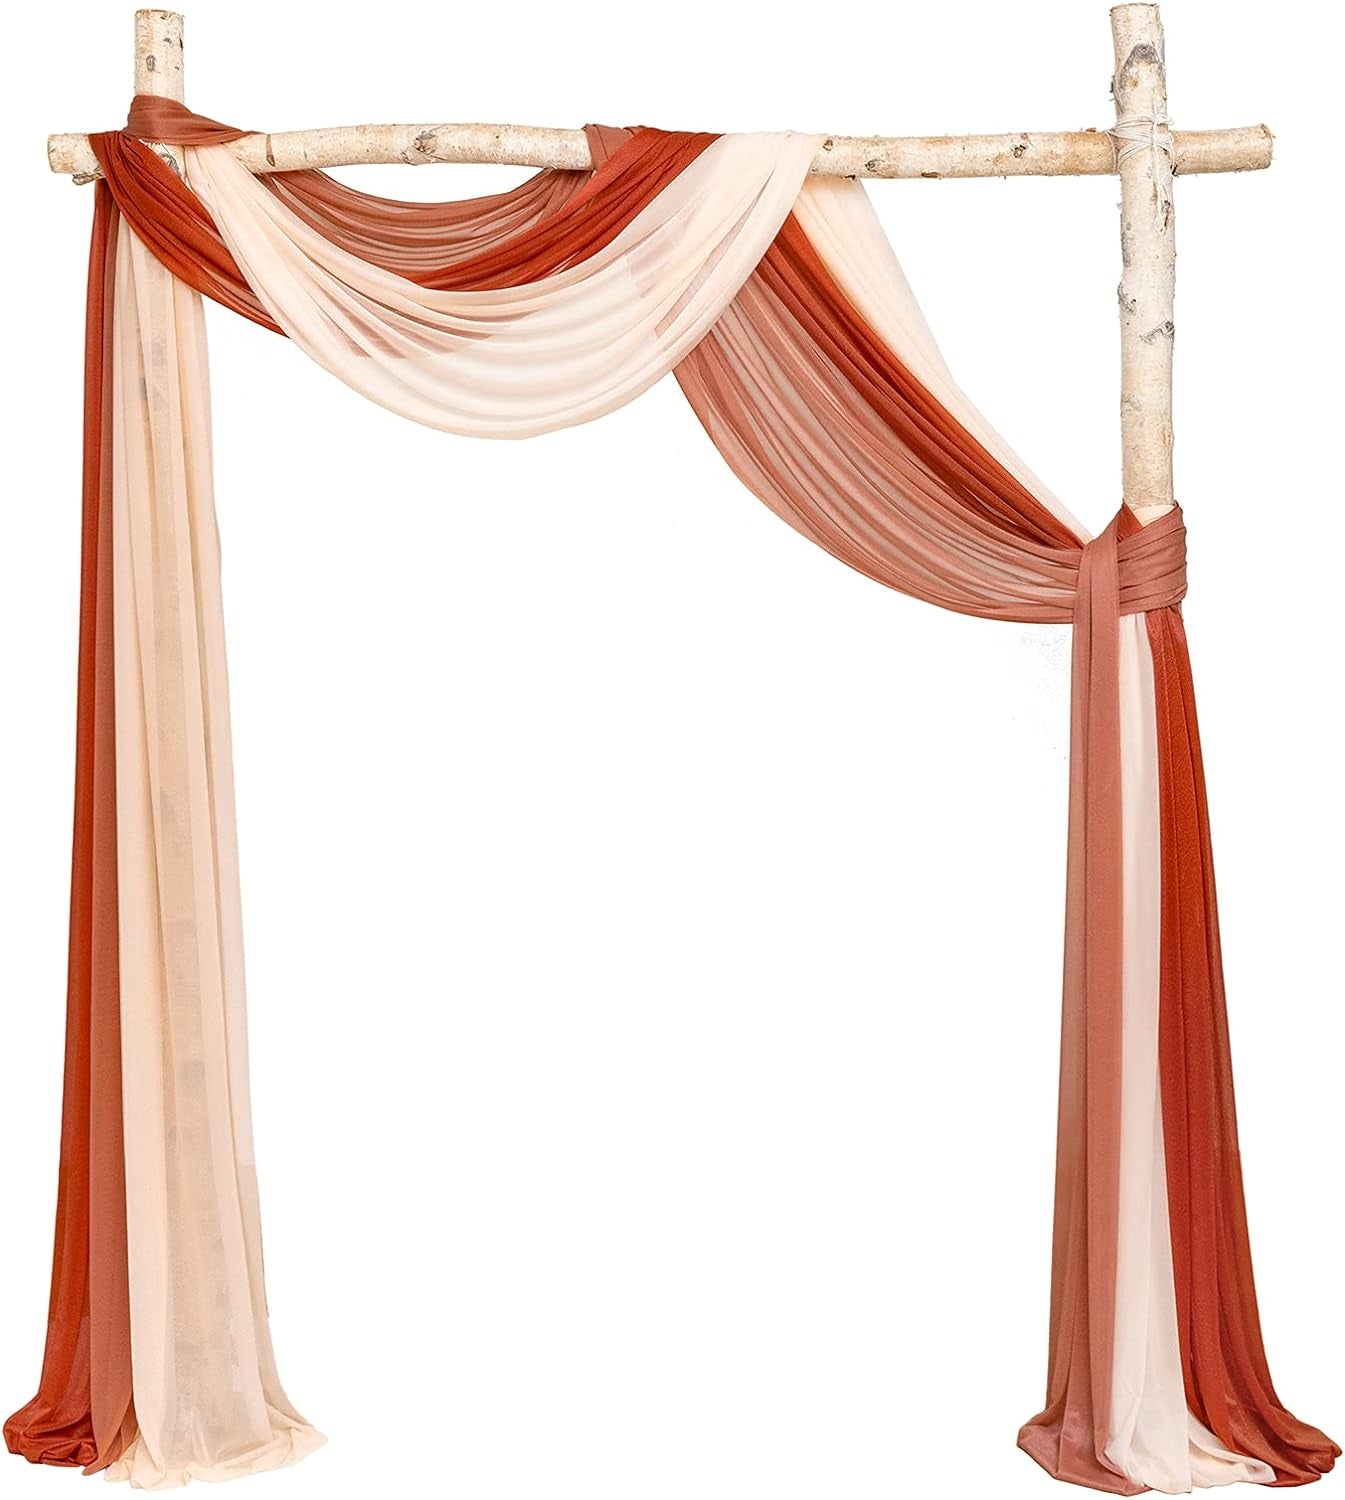 Ling'S Moment 3 Panels 20Ft Wedding Arch Chiffon Draping Fabric, Sheer Hanging Drapes Arrangement for Wedding Ceremony Reception Backdrop Outdoors Party Swag Home Decor (Dusty Rose & Burgundy & Blush)